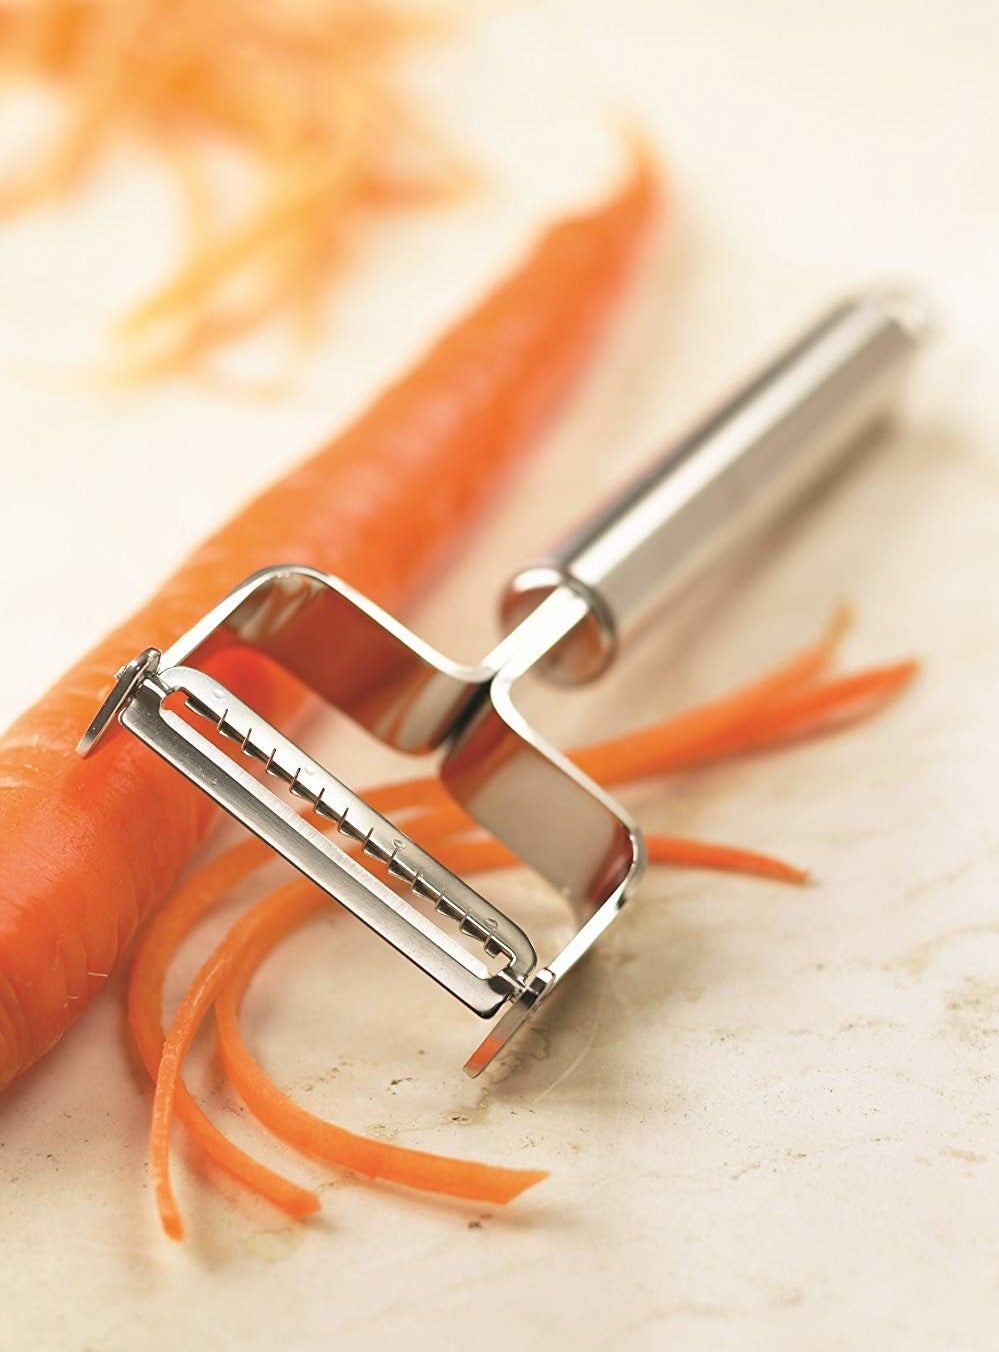 The silver julienne slicer used on a carrot